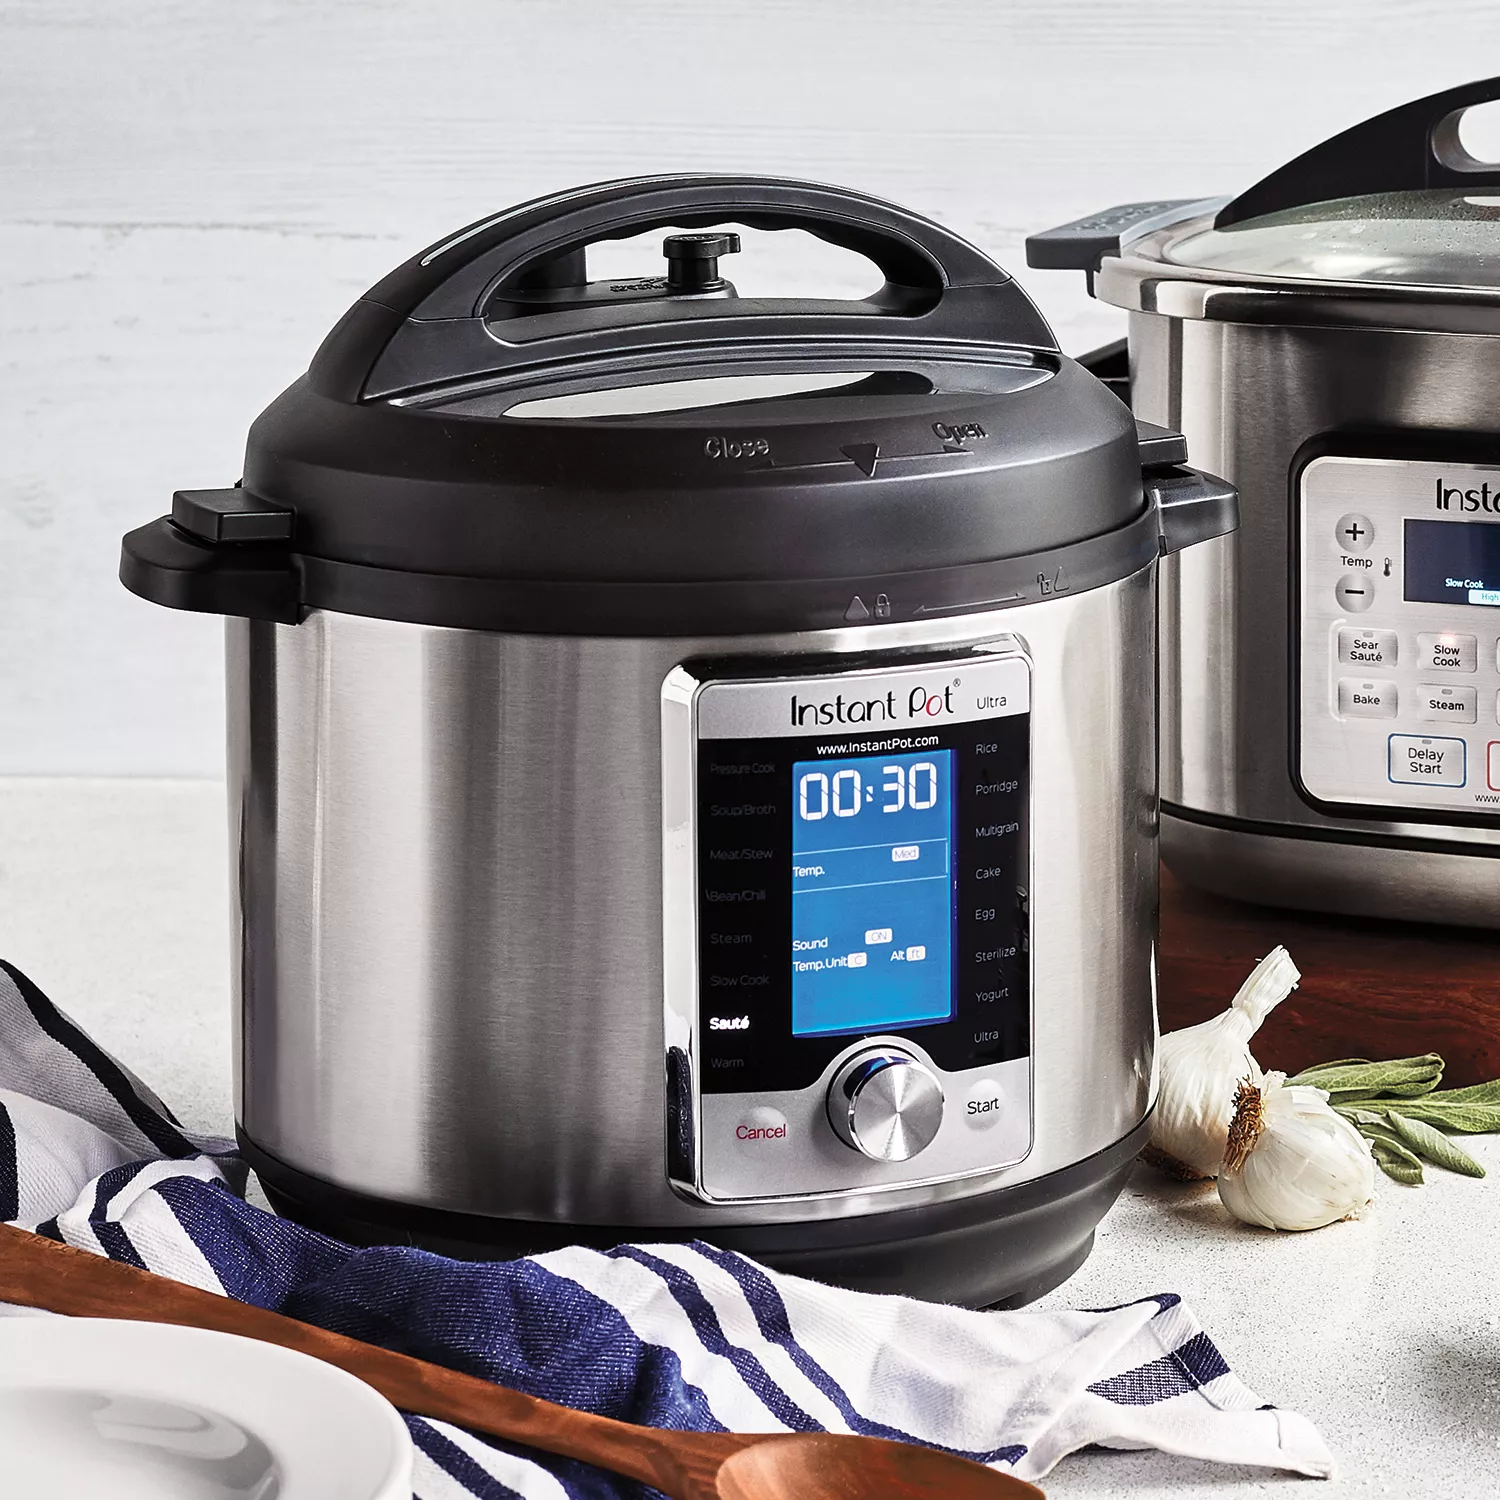 Instant Pot Ultra 6 Quart Multi-Cooker Review - This Old Gal